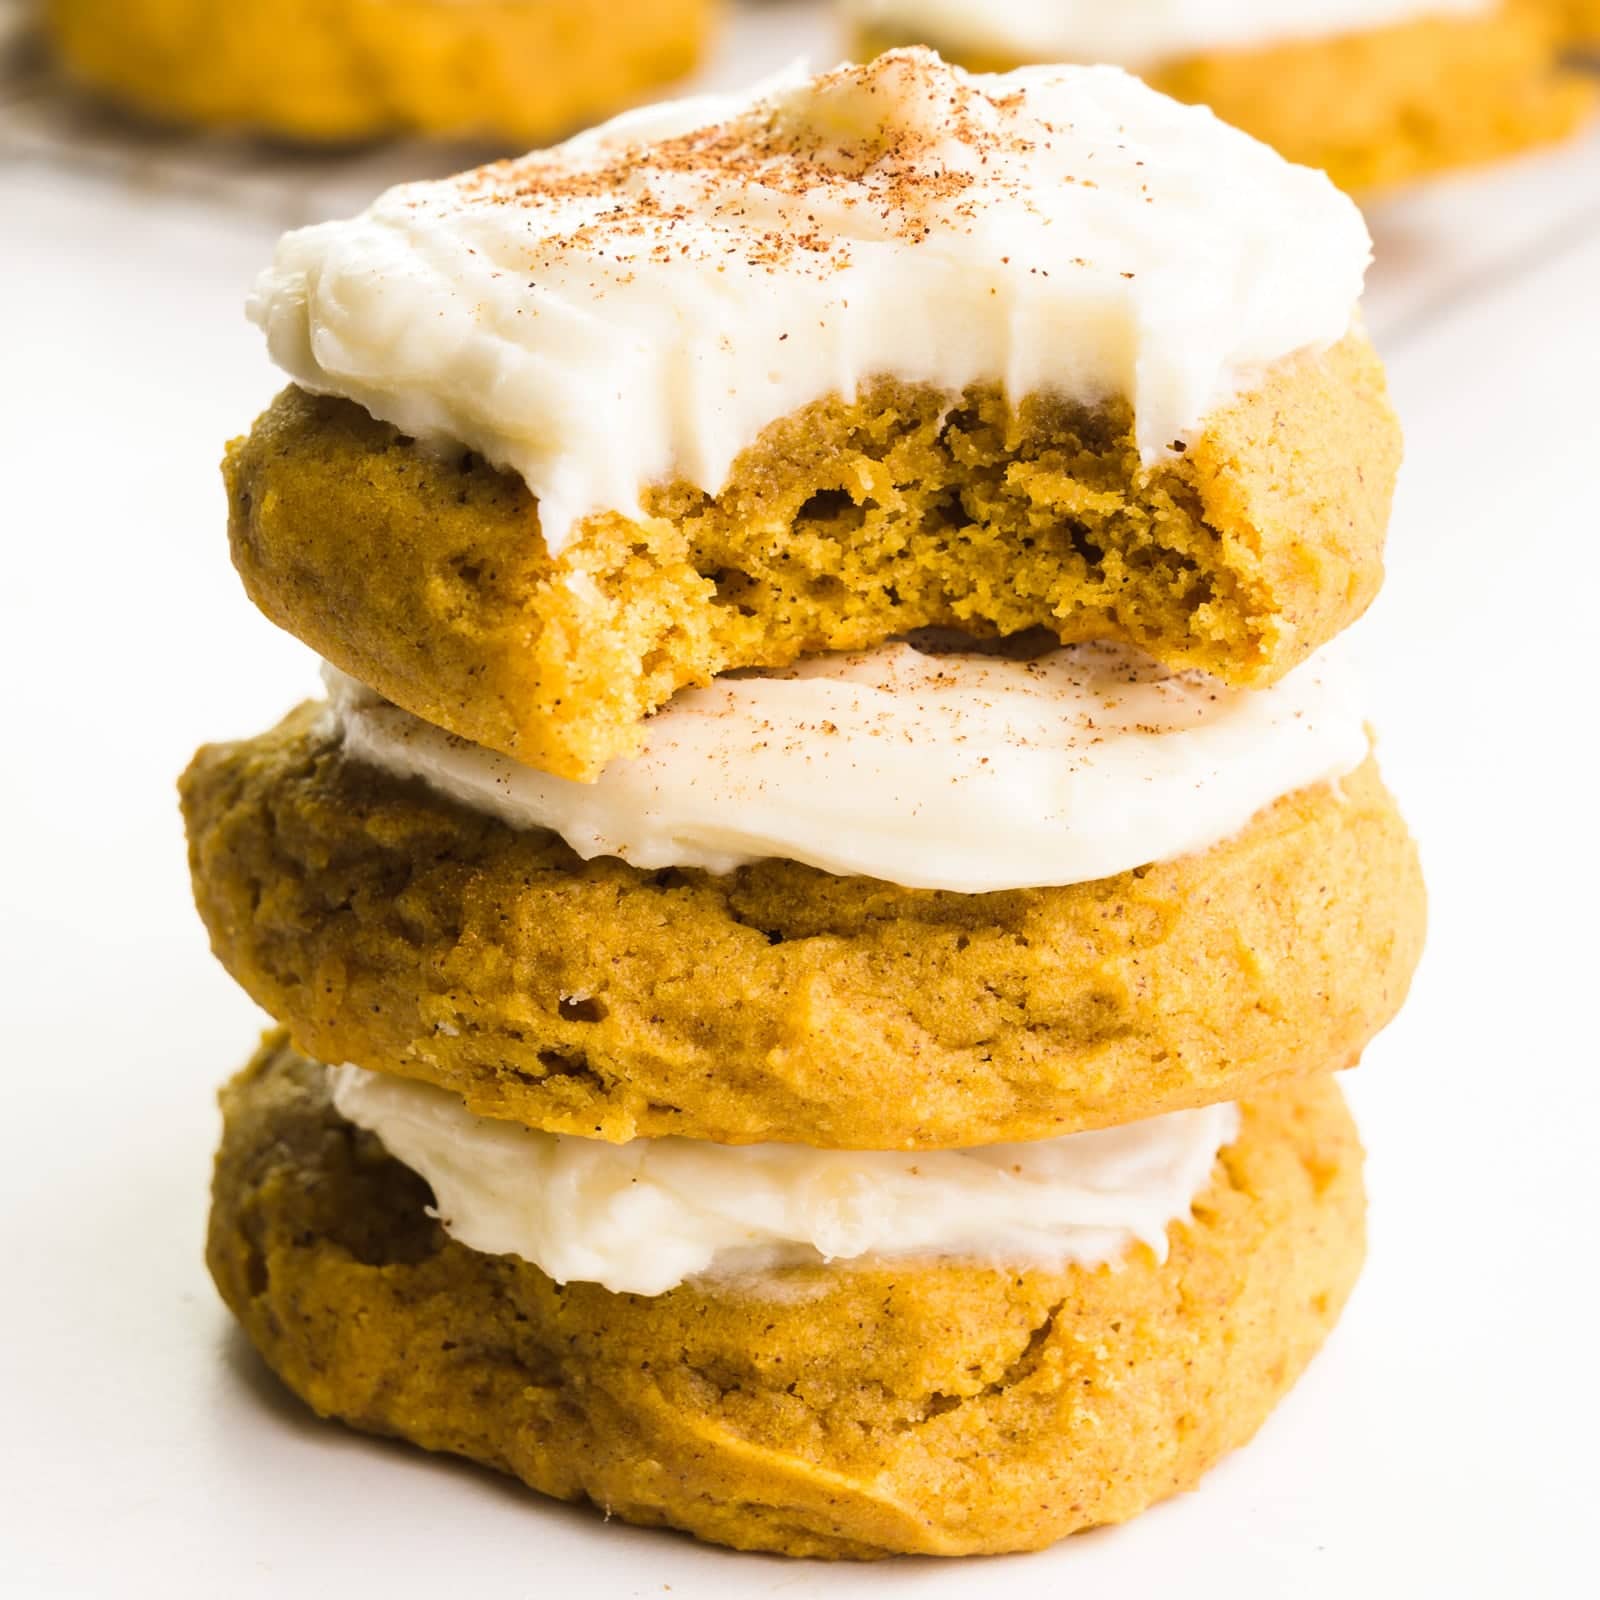 A stack of three vegan pumpkin cookies shows the top one with a bite taken out. There are more cookies in the background.